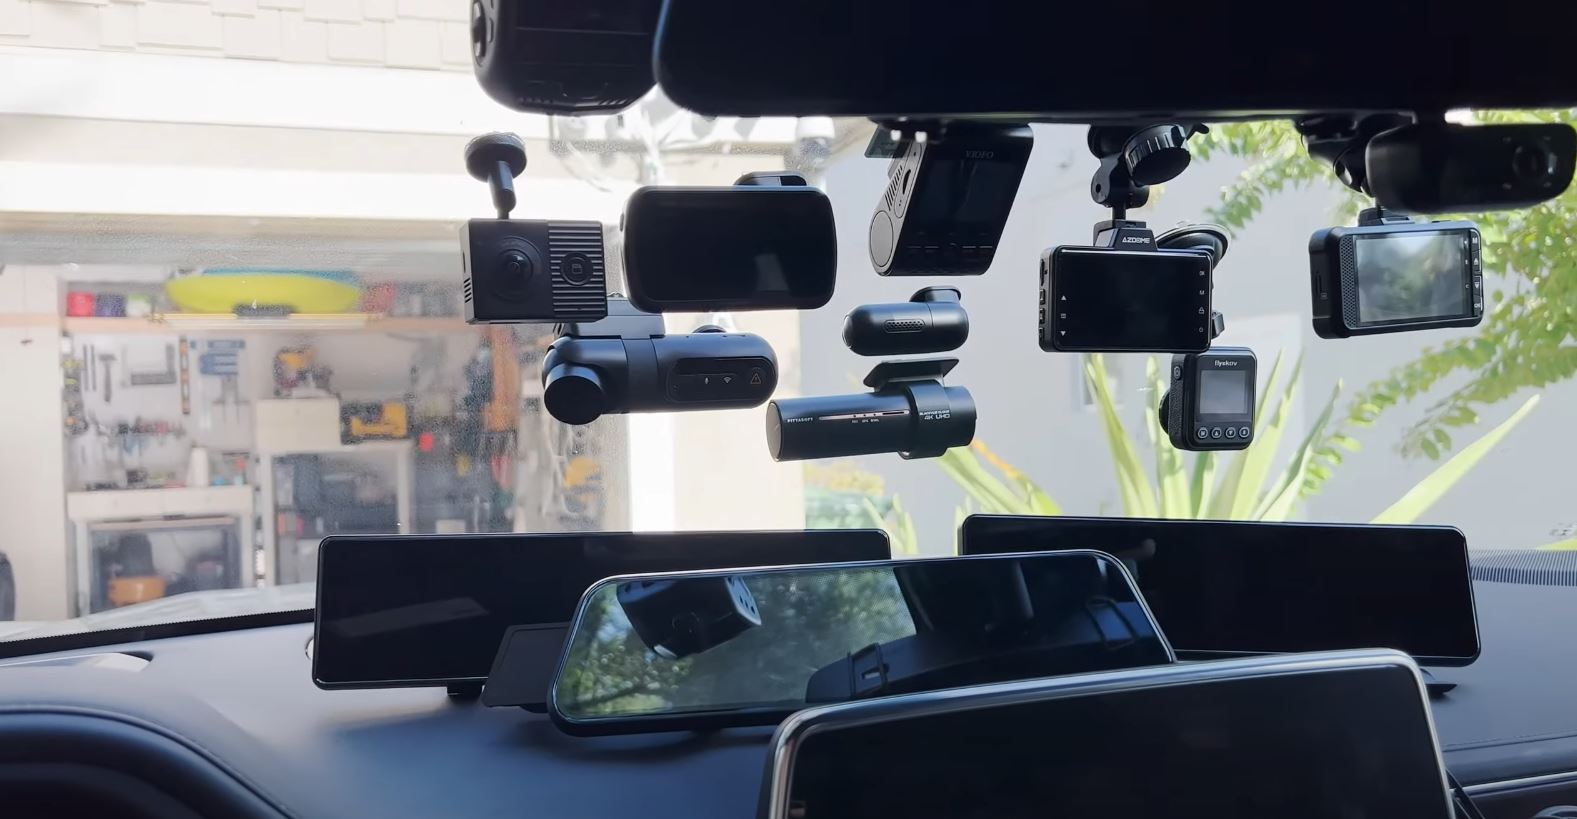 New to Dash Cams? Read Our Ultimate Buyer's Guide